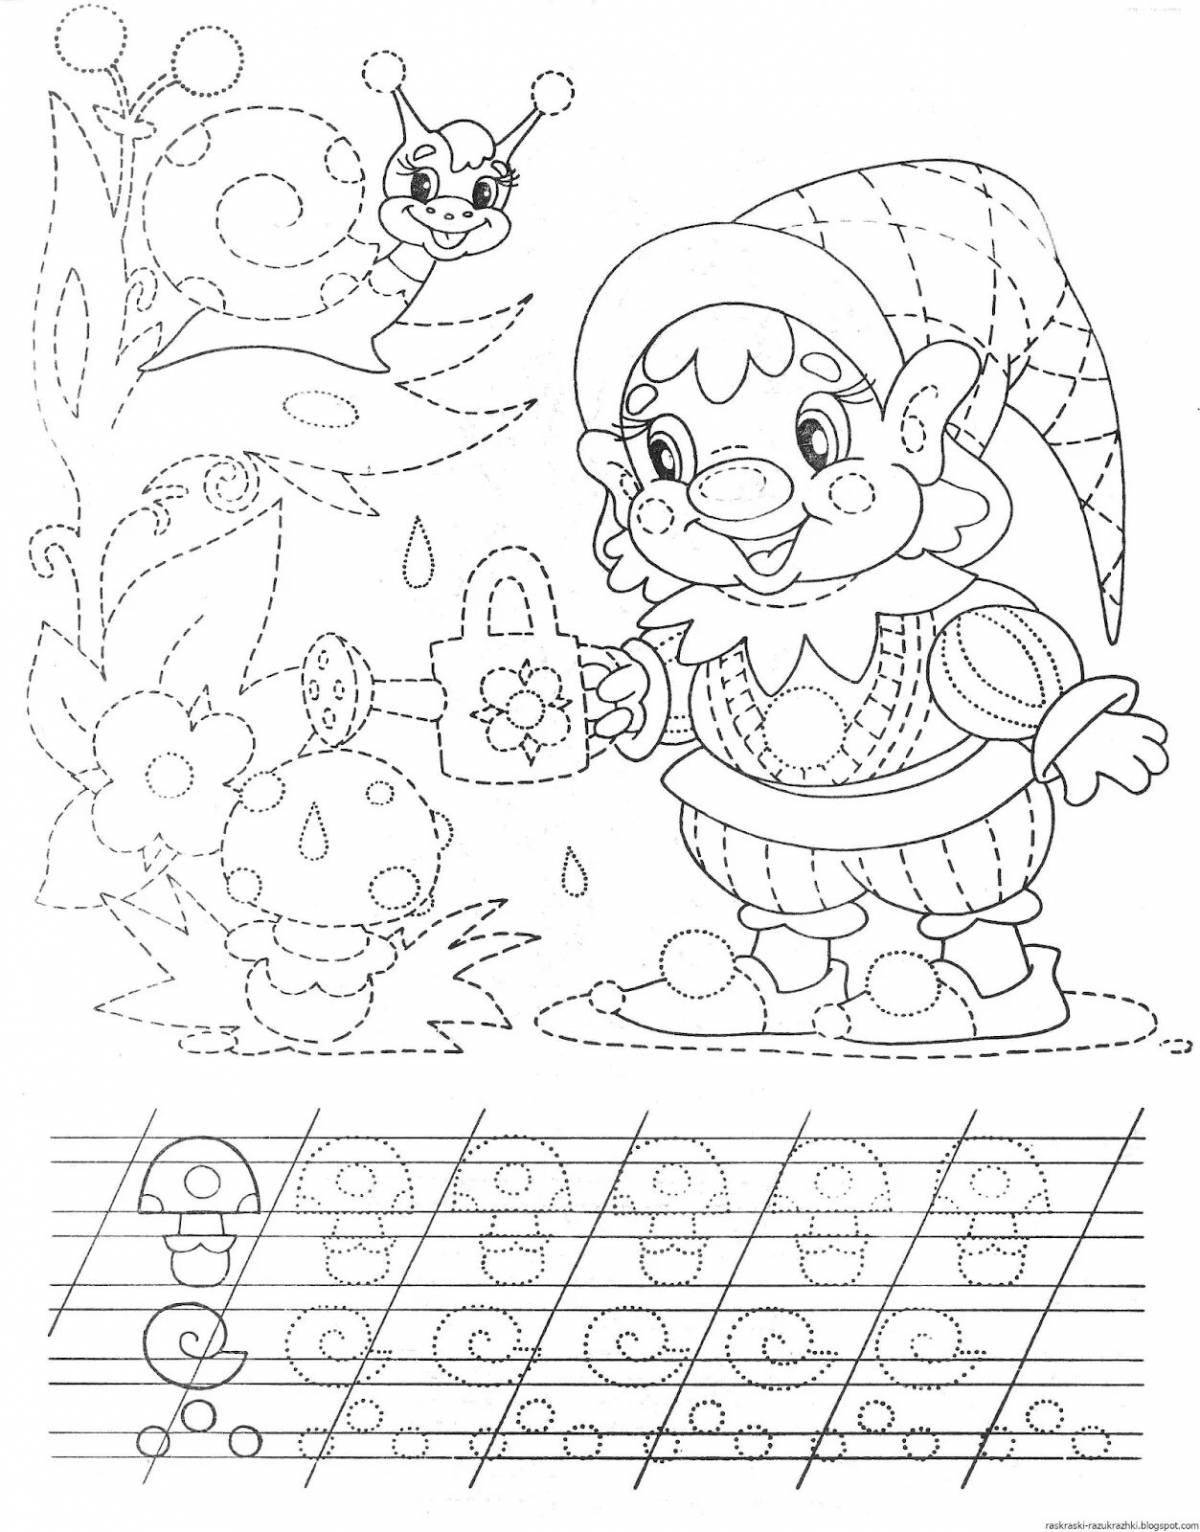 Coloring book for kids with recipe